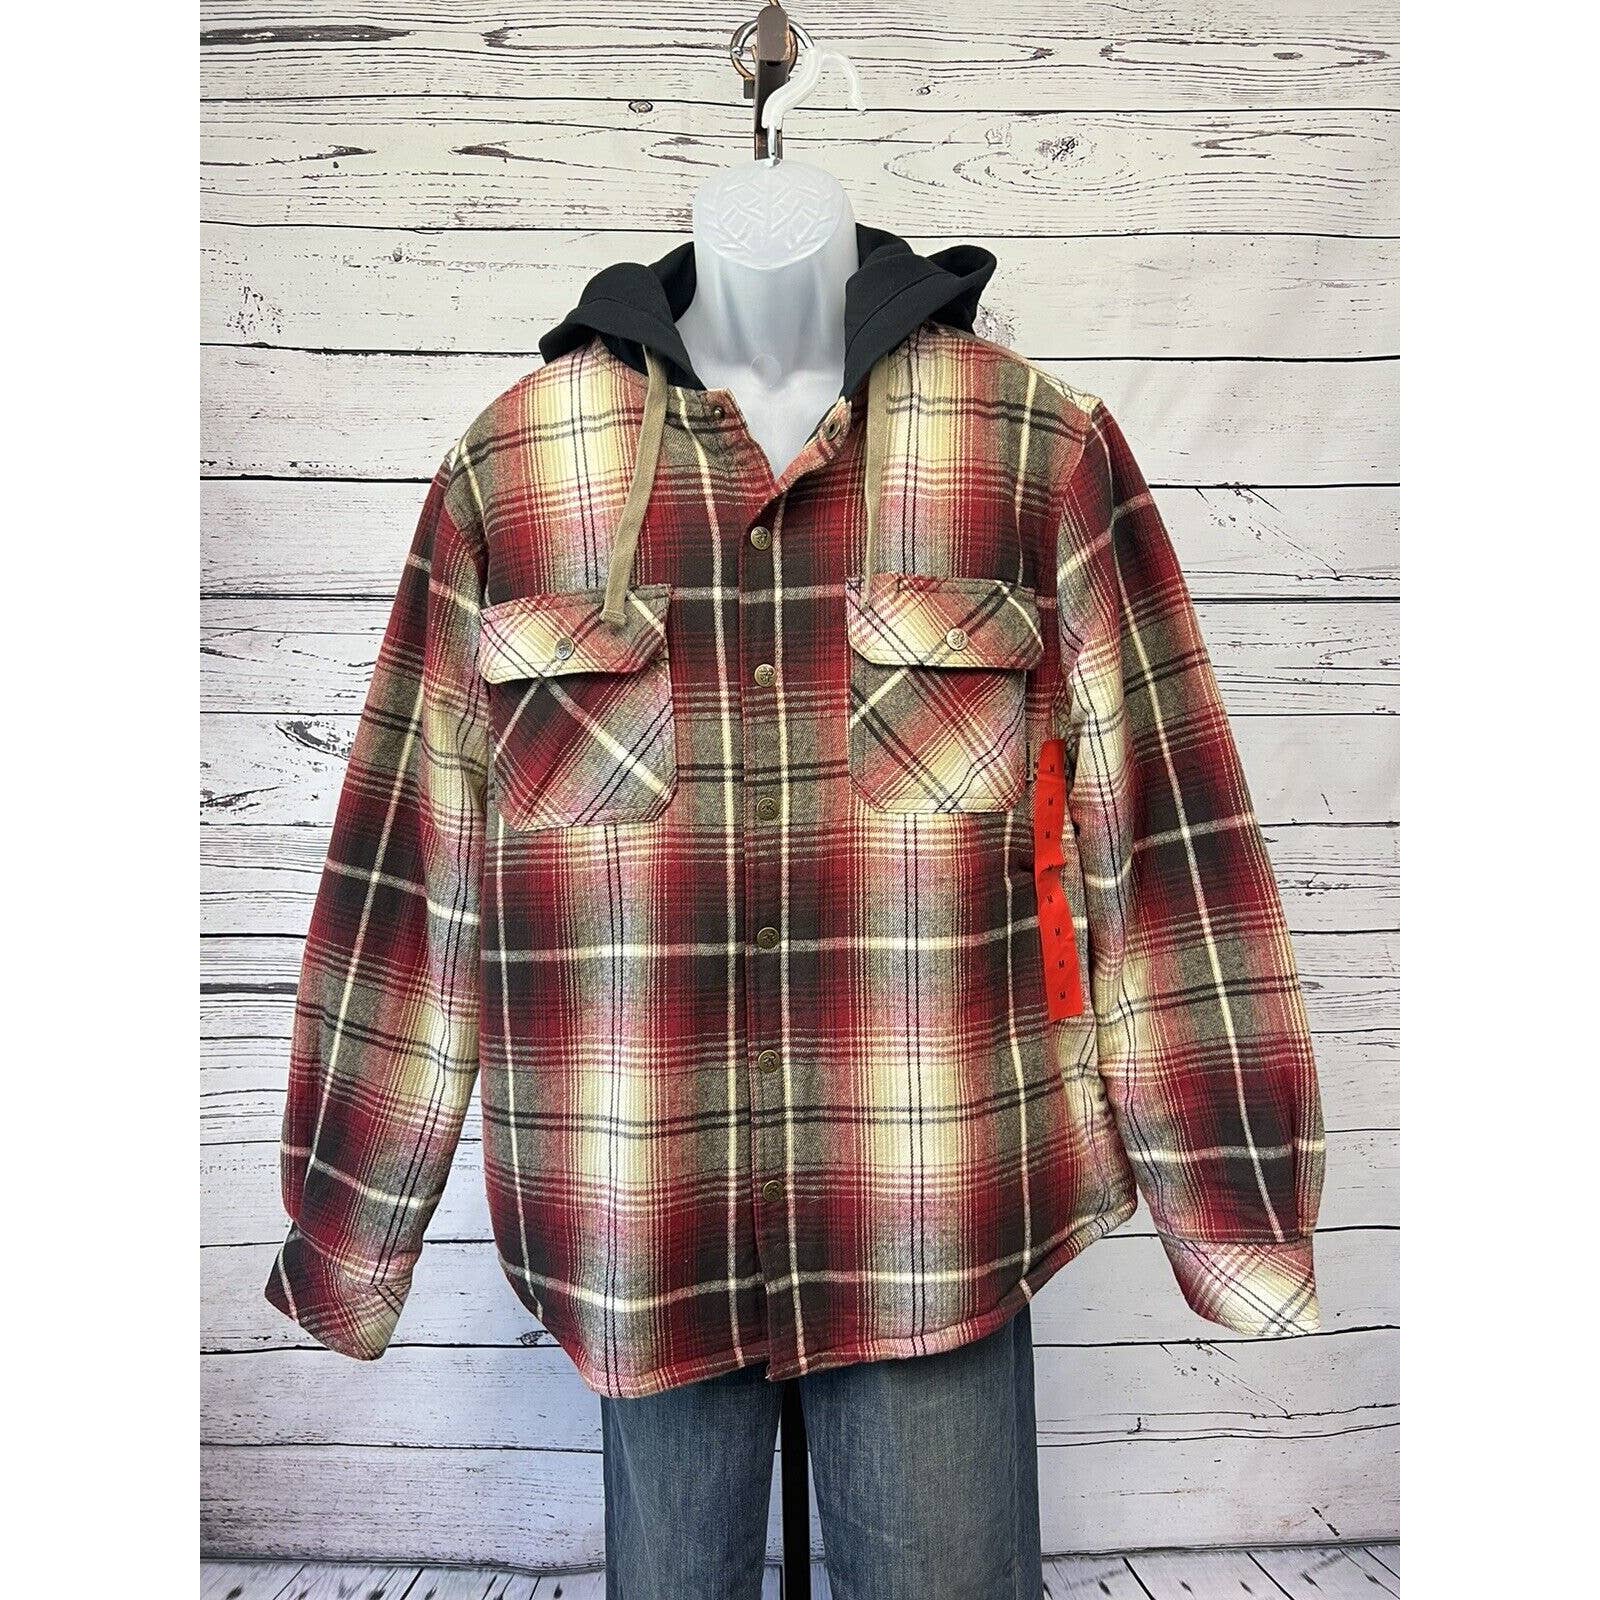 Legendary Outfitters Flannel Shirt Jacket Mens Medium Hooded Snap Buttons Plaid